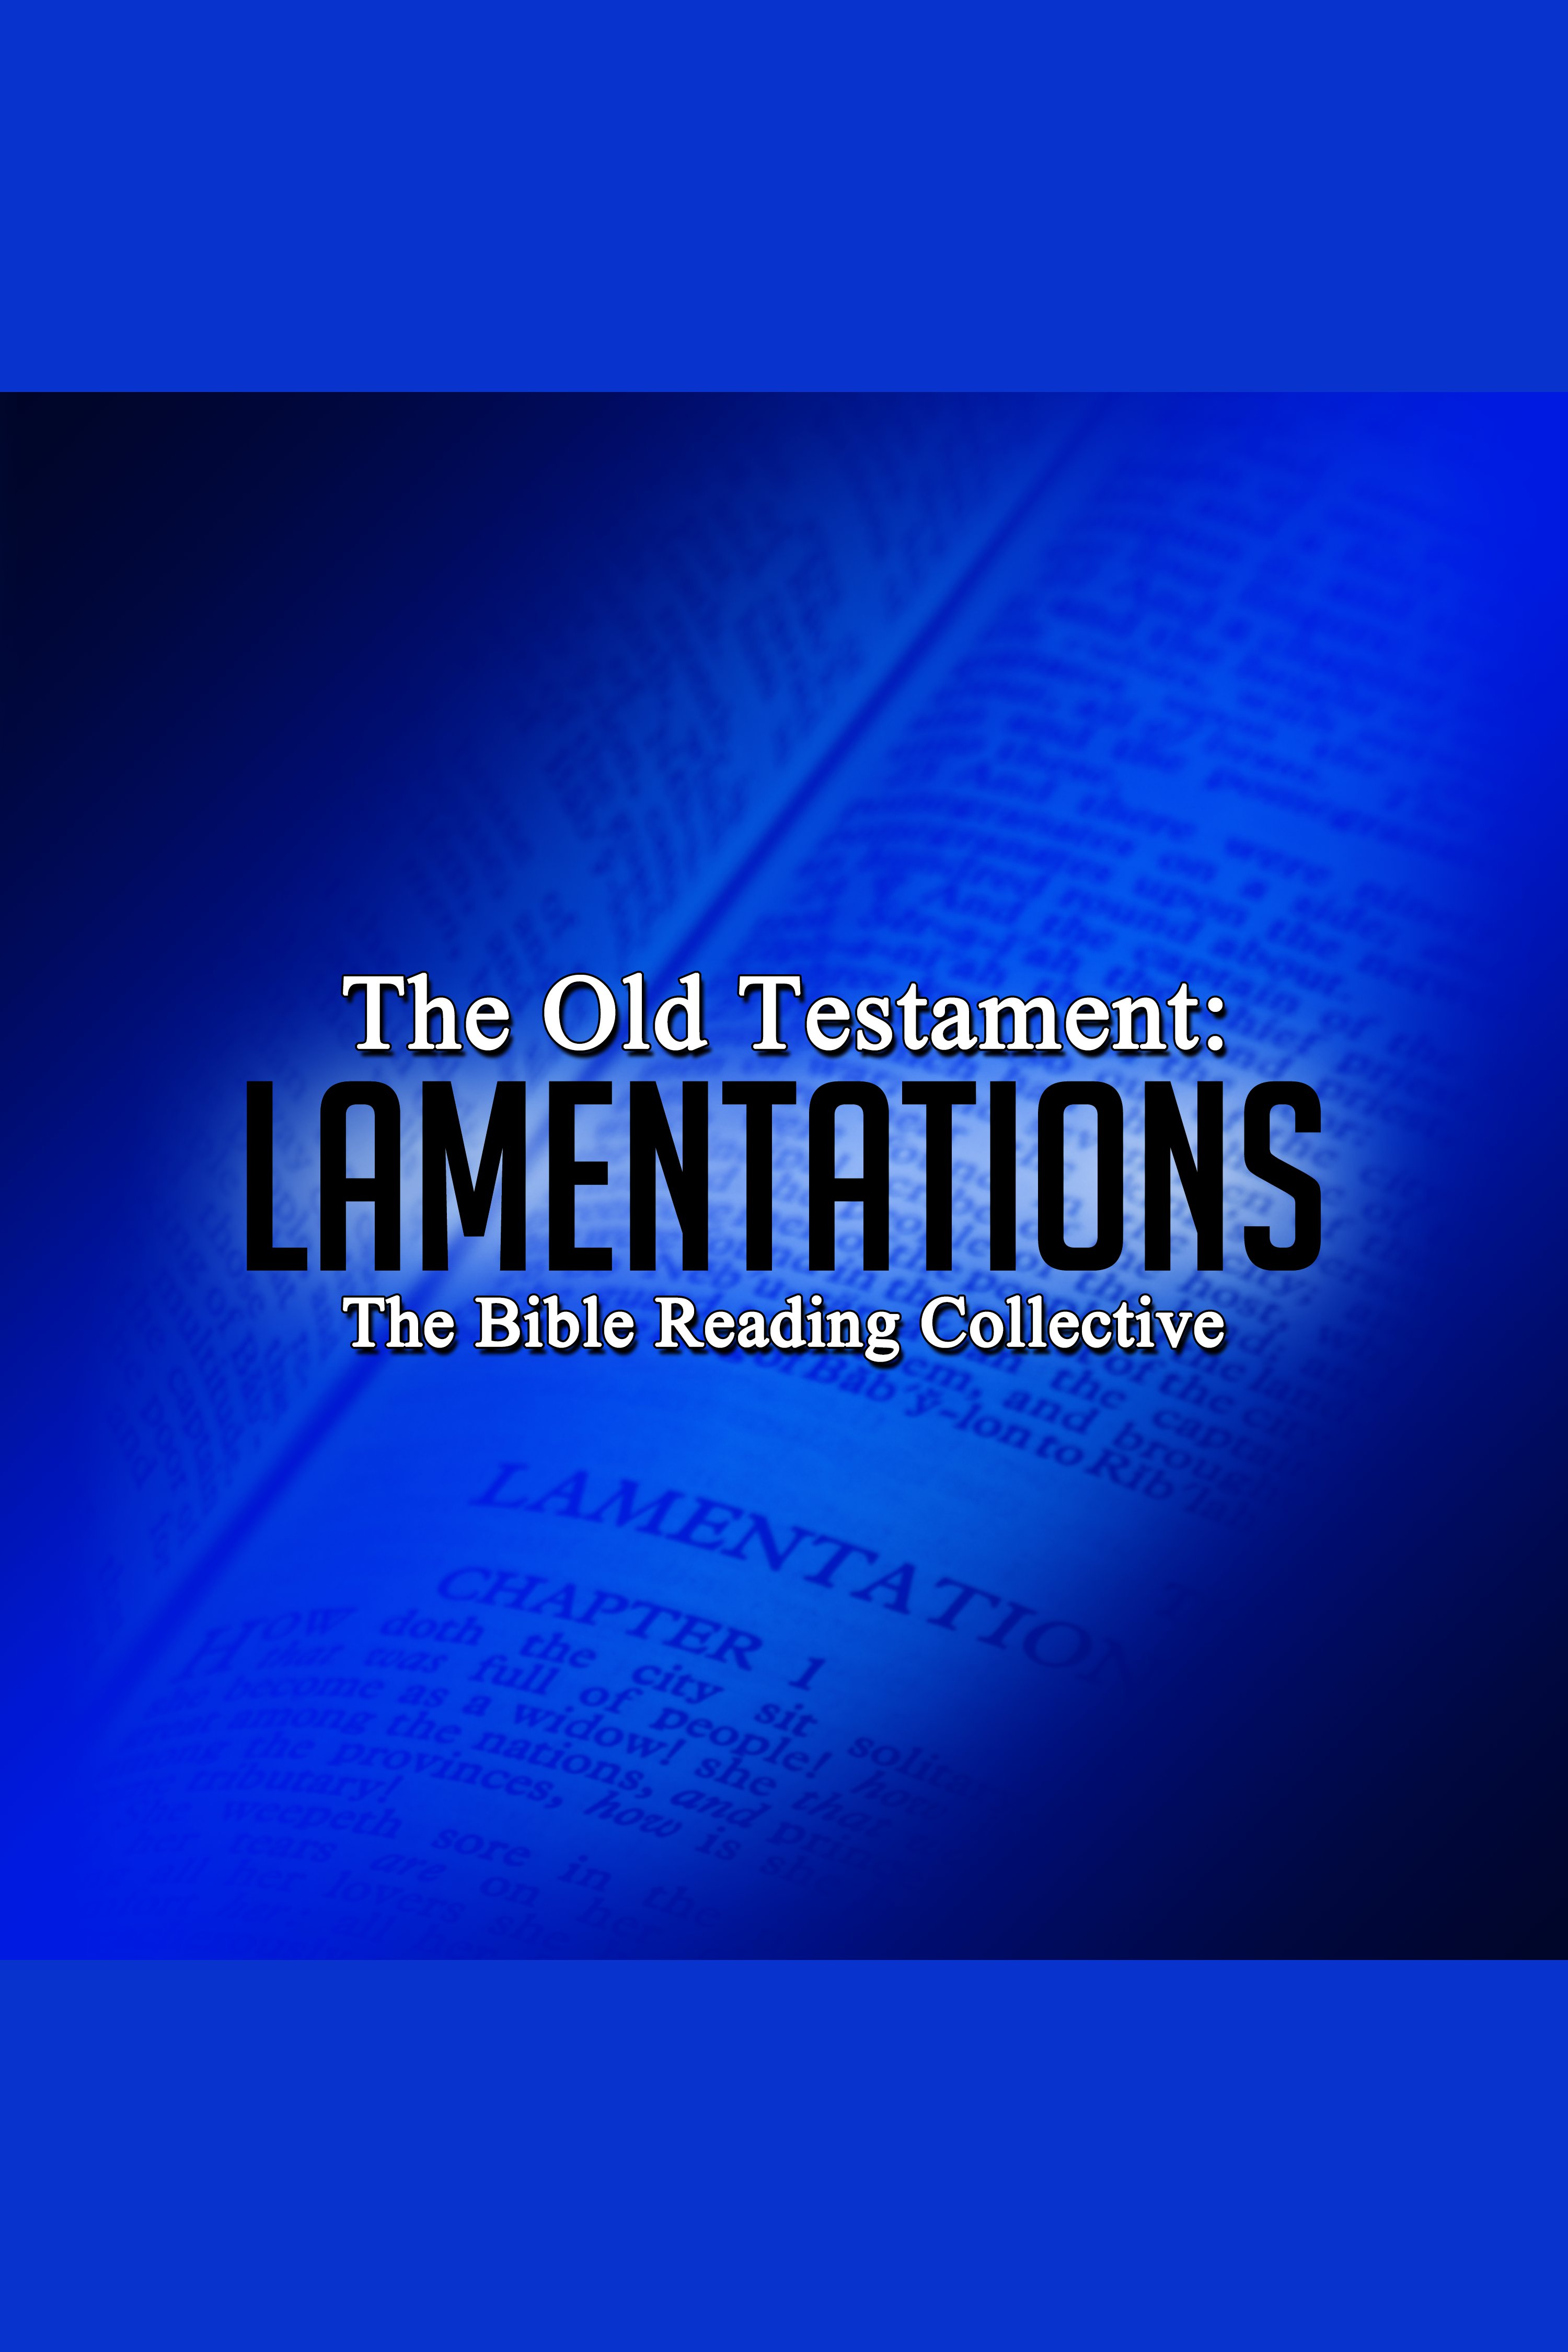 The Old Testament: Lamentations cover image